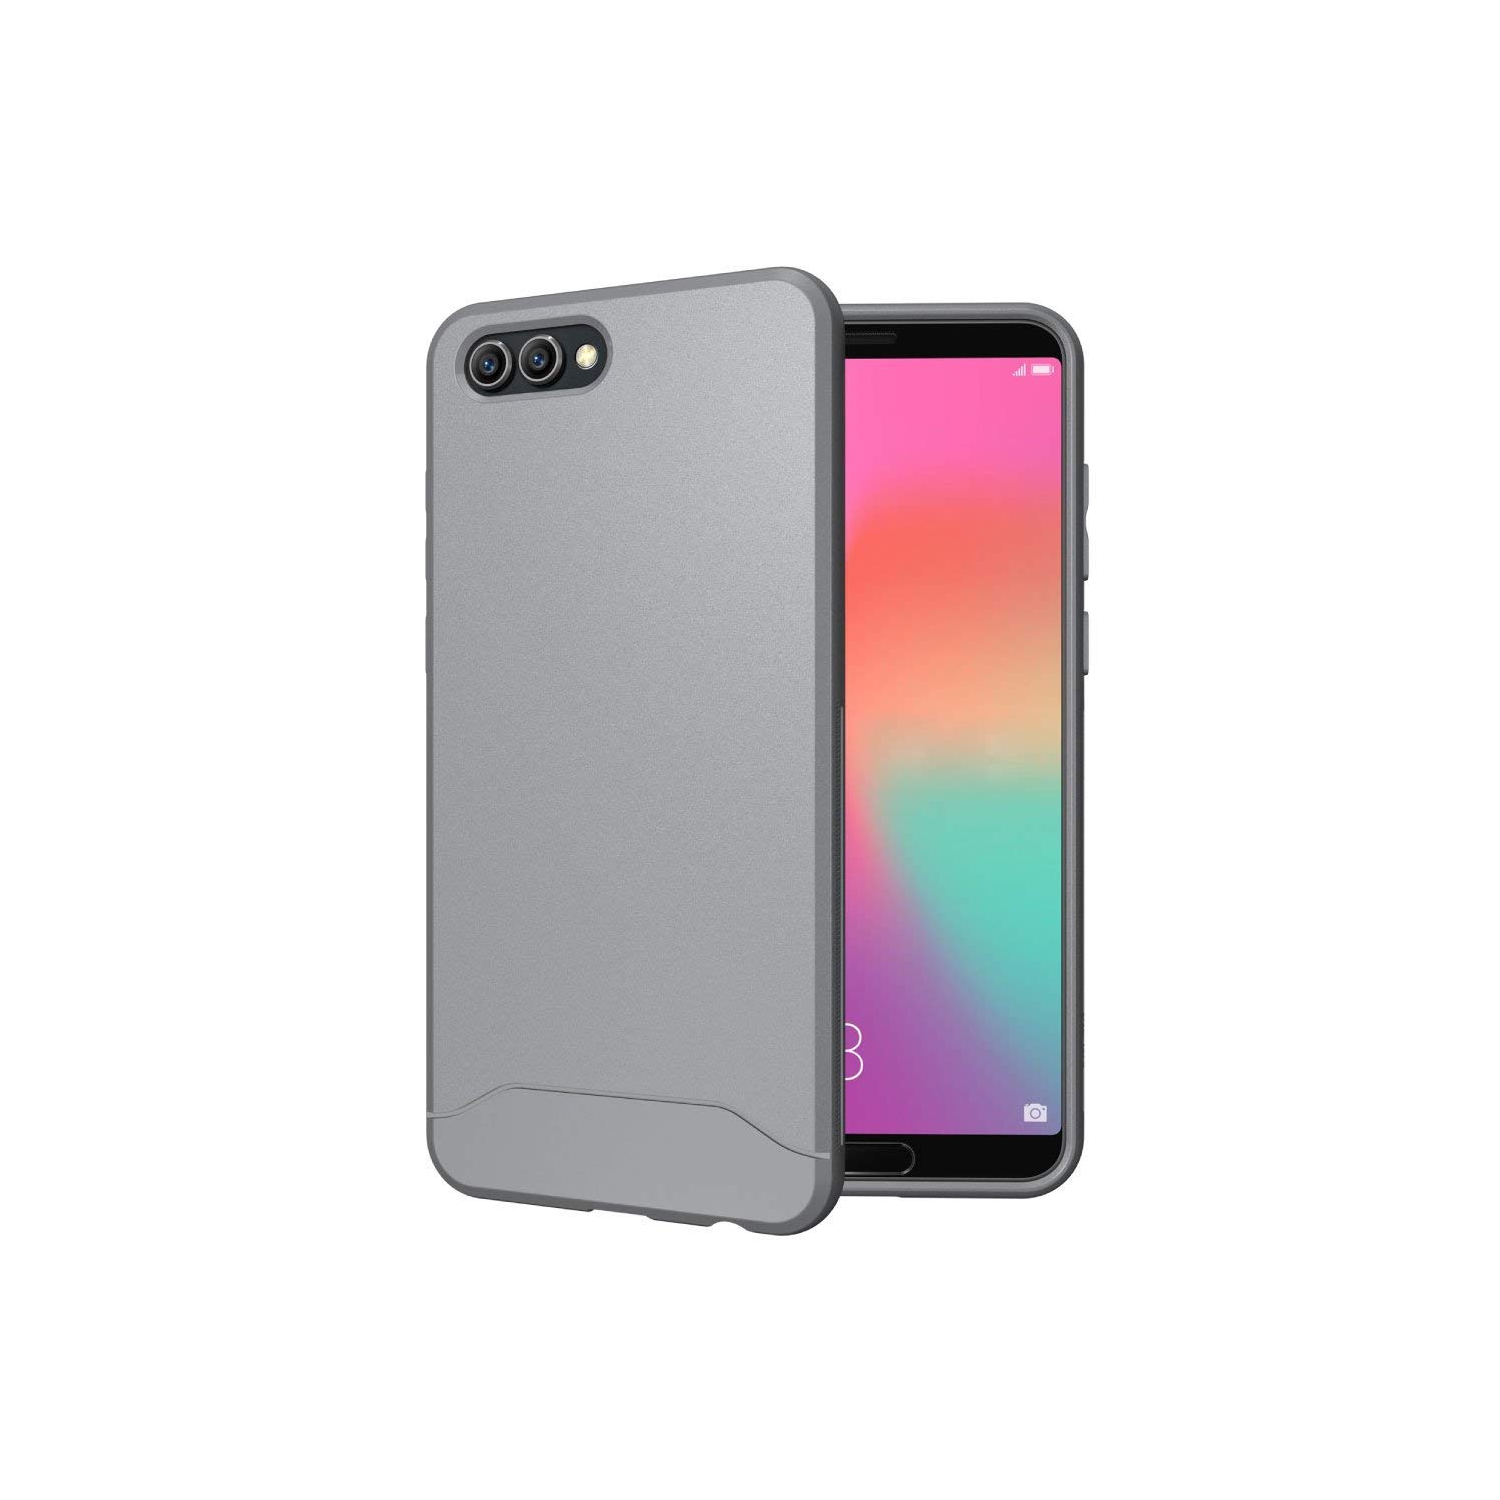 Honor View 10 Case, TUDIA Full-Matte Lightweight [Arch S] TPU Bumper Shock Absorption Cover for Huawei Honor View 10 (Gray)